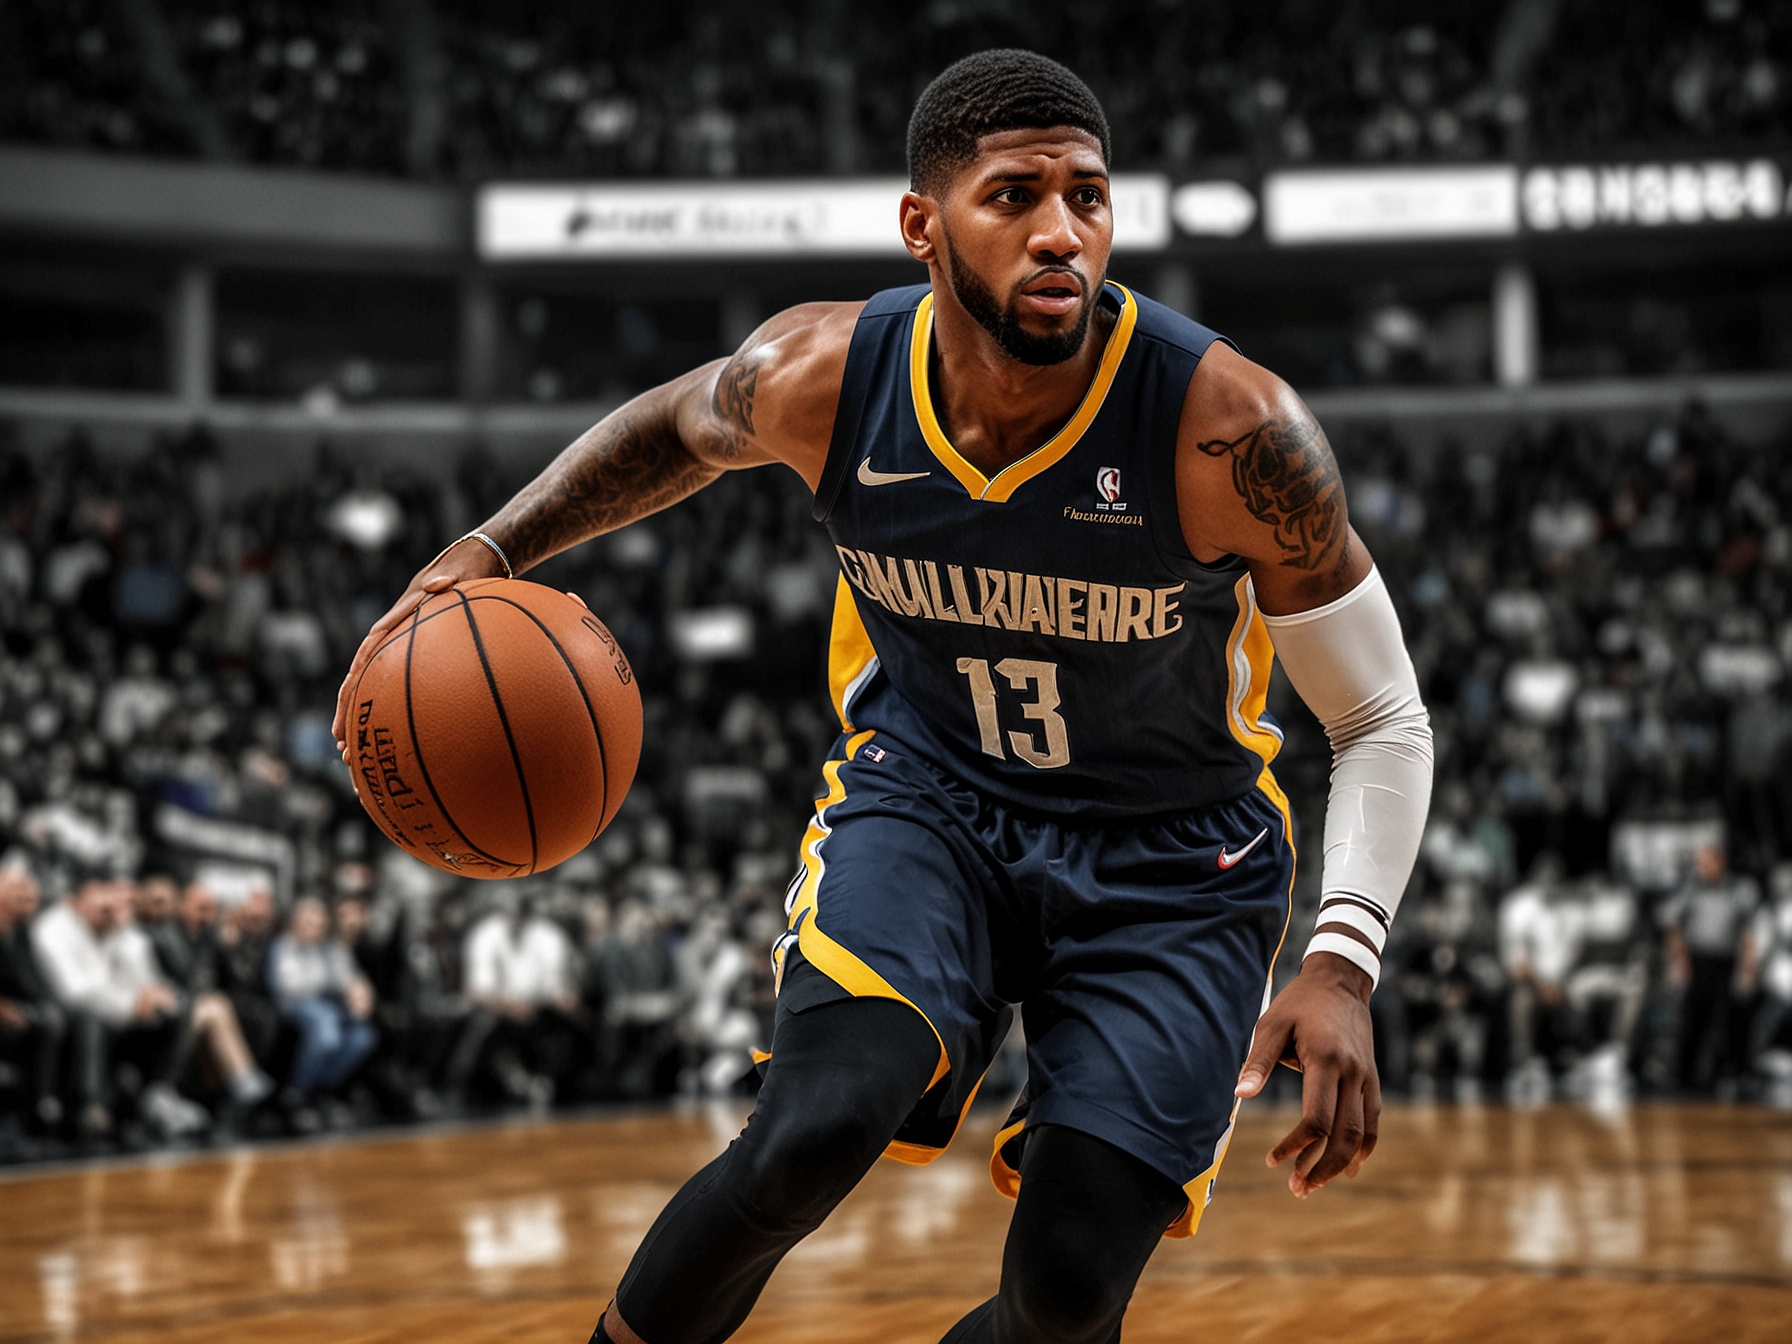 An image of Paul George in action on the basketball court, symbolizing his versatile talent and the anticipation surrounding his free agency decision this NBA offseason.